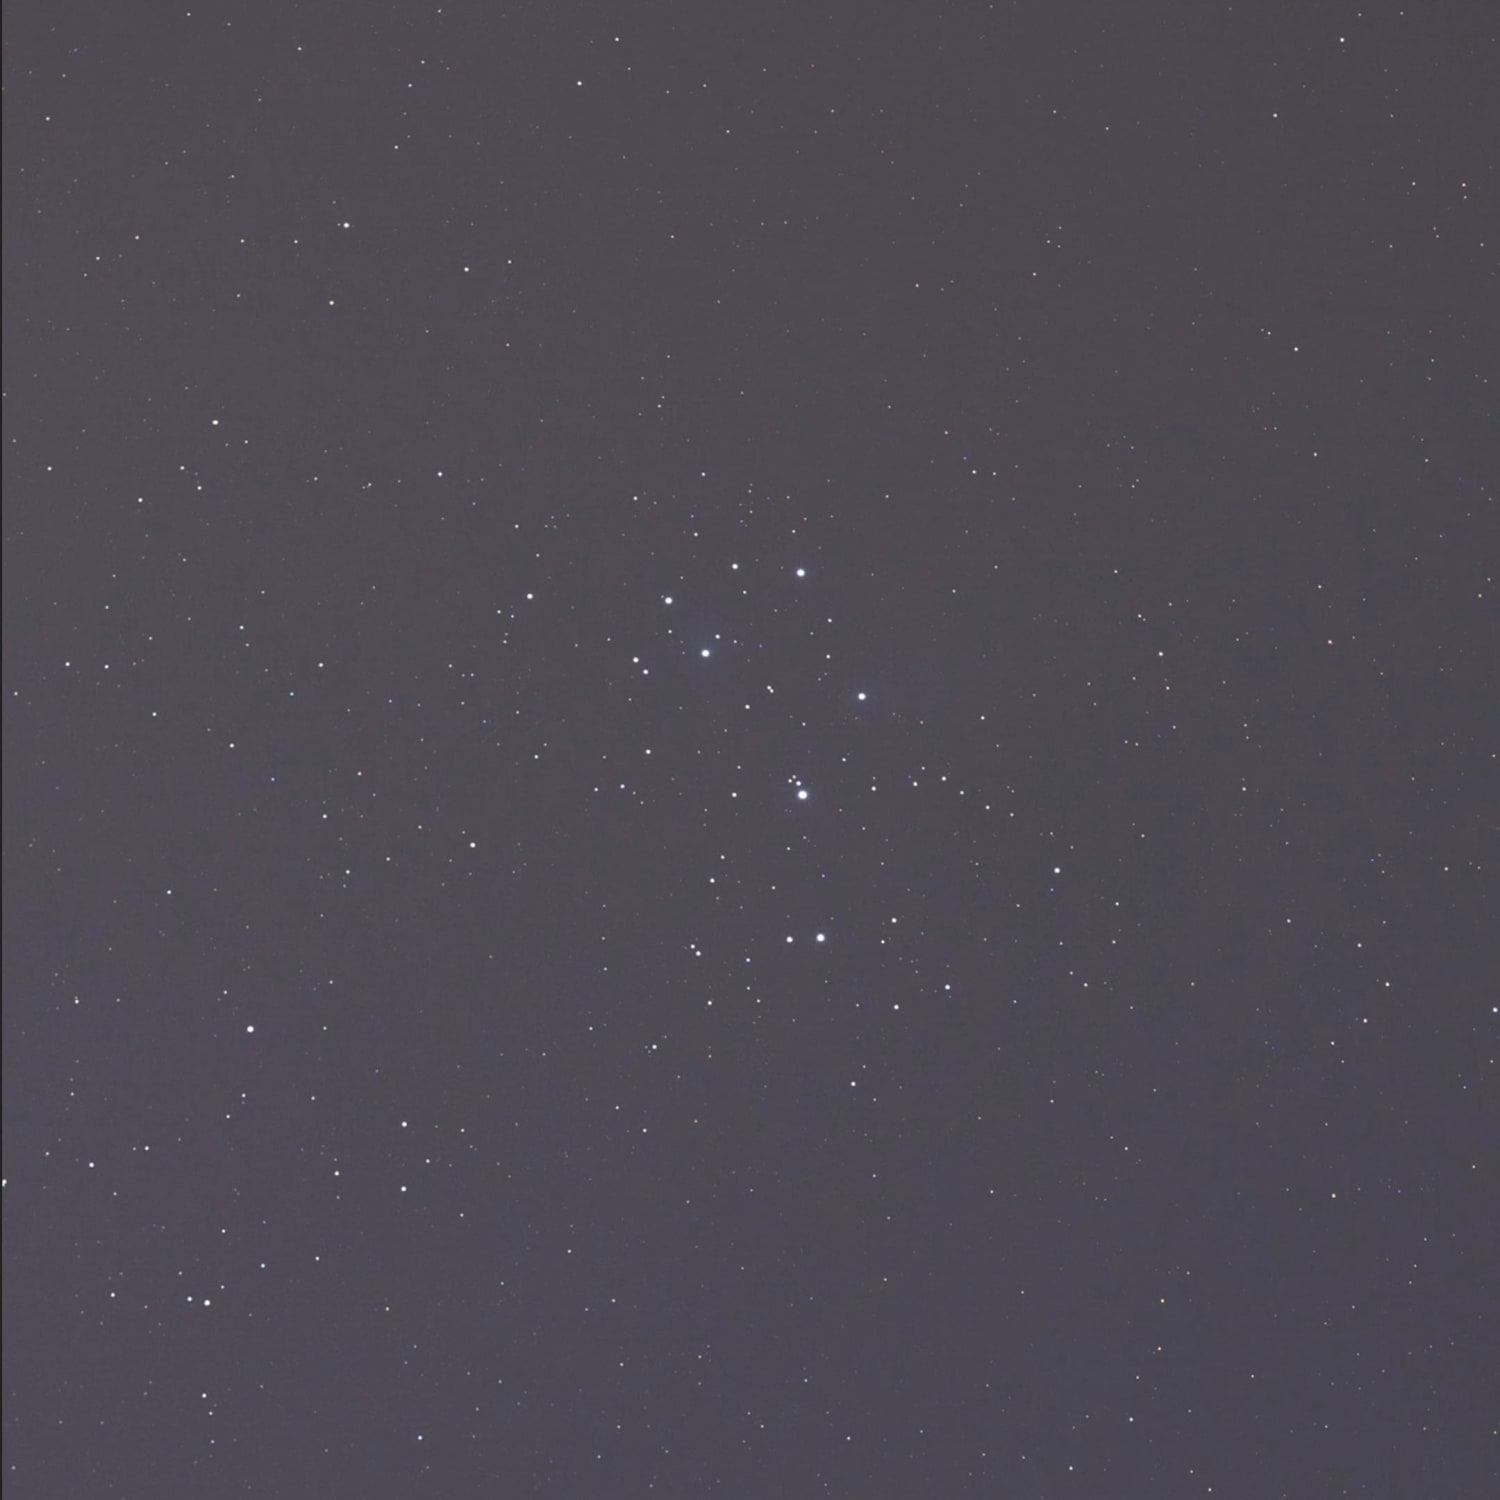 Pleiades Star Cluster - Image Processing Before & After